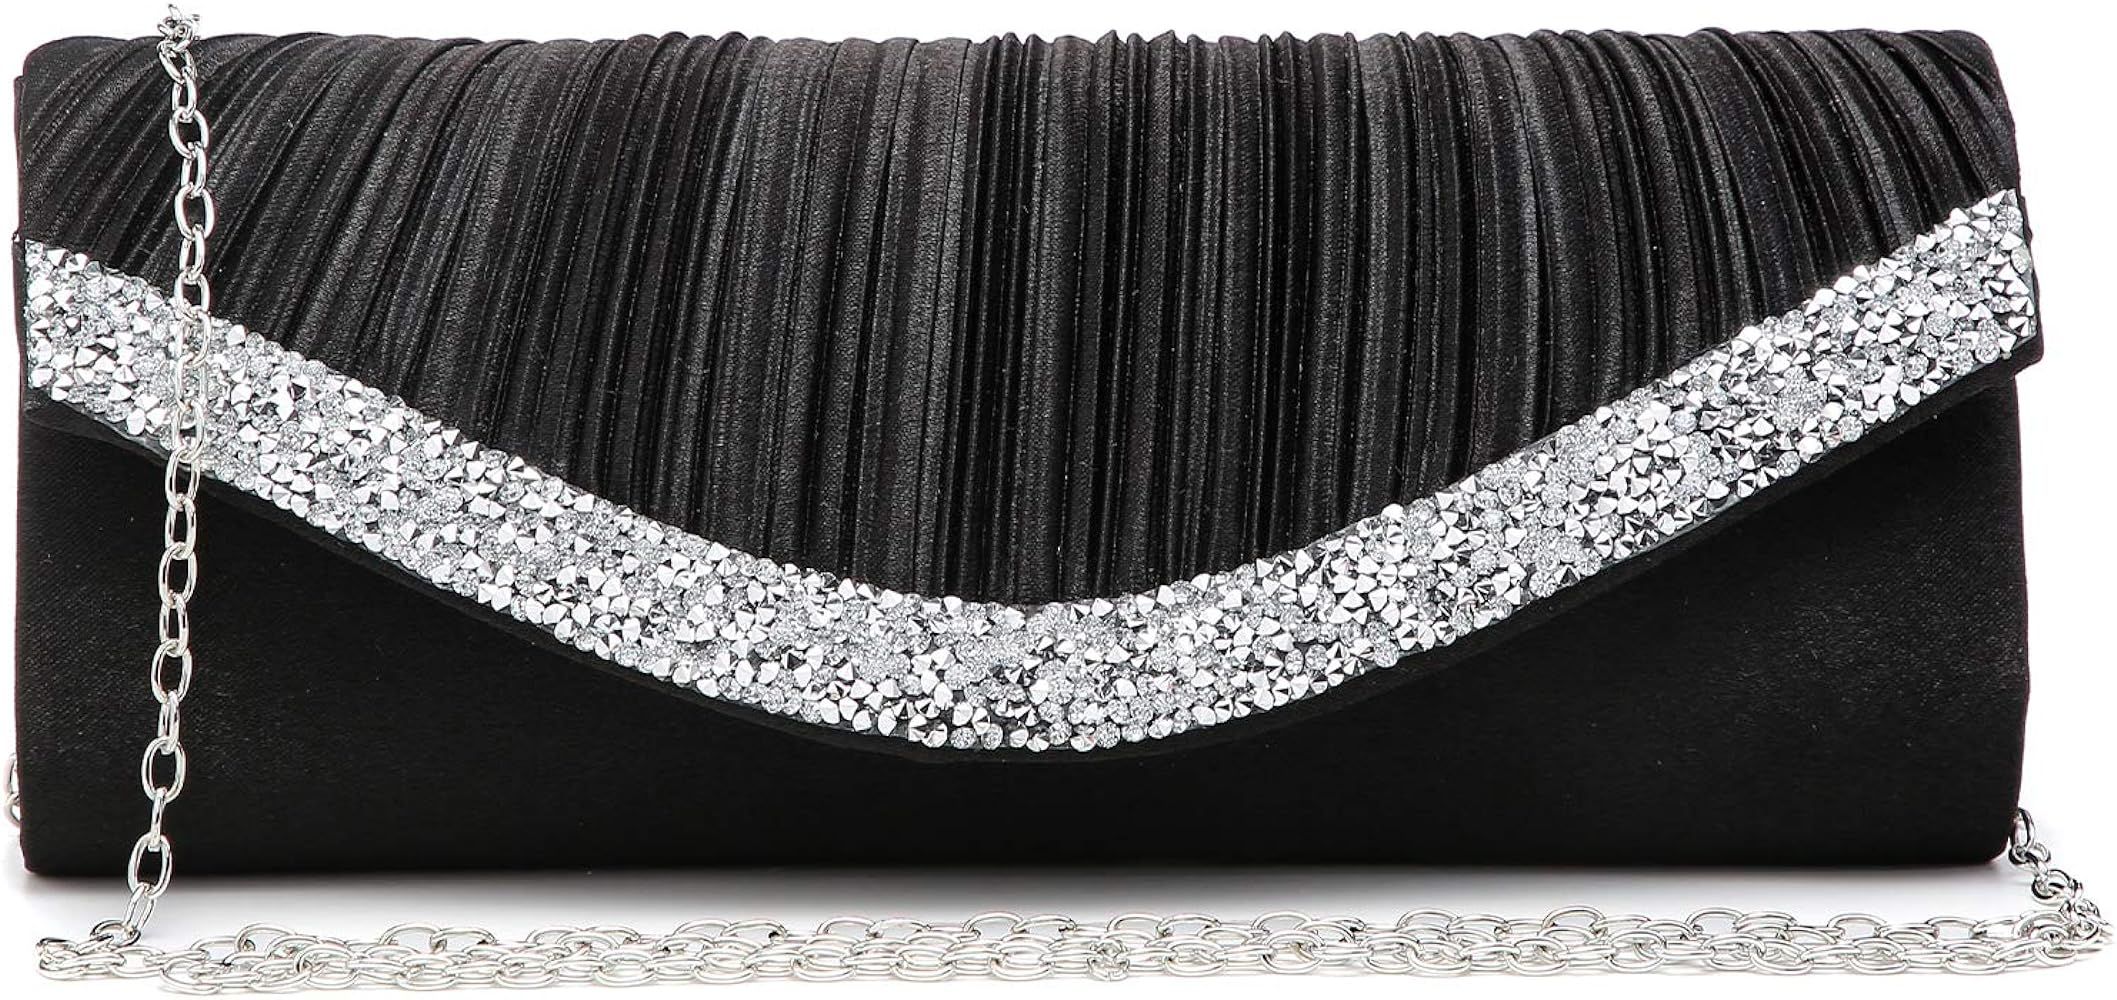 Dasein Women Satin Evening Bags Clutch Purses Wedding Purse Formal Handbags Party Prom Clutches with | Amazon (US)